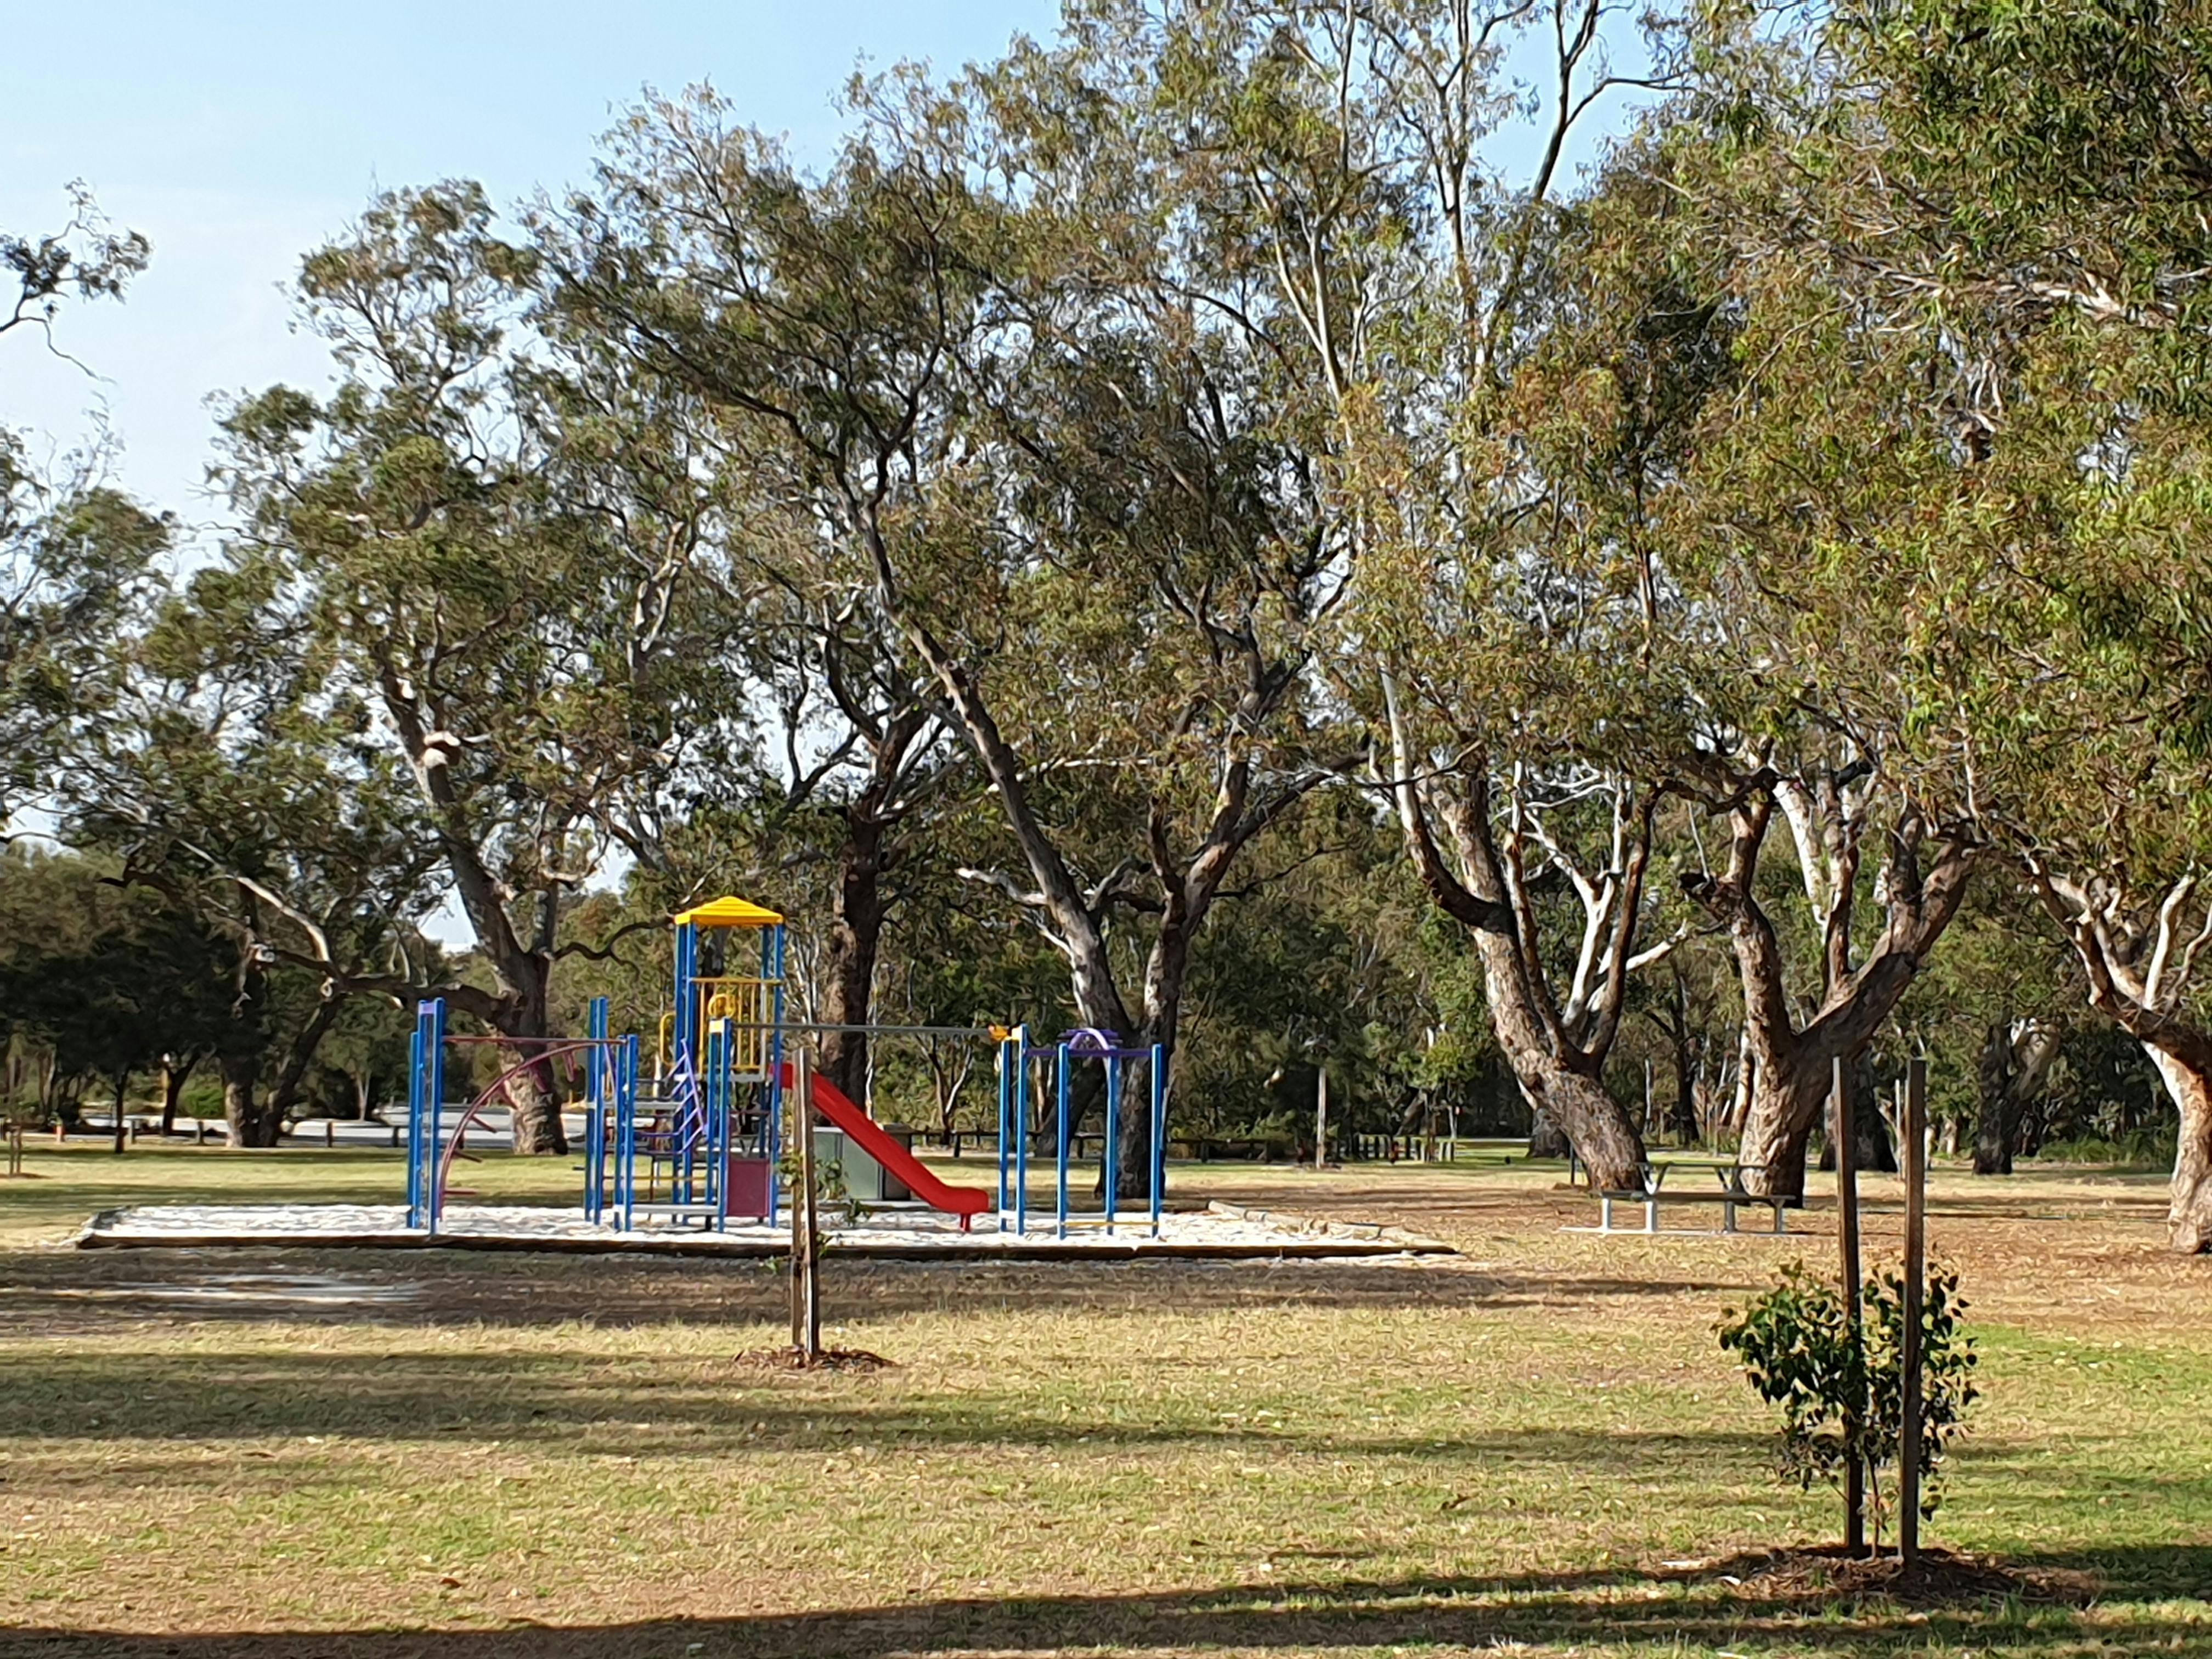 Existing play equipment 